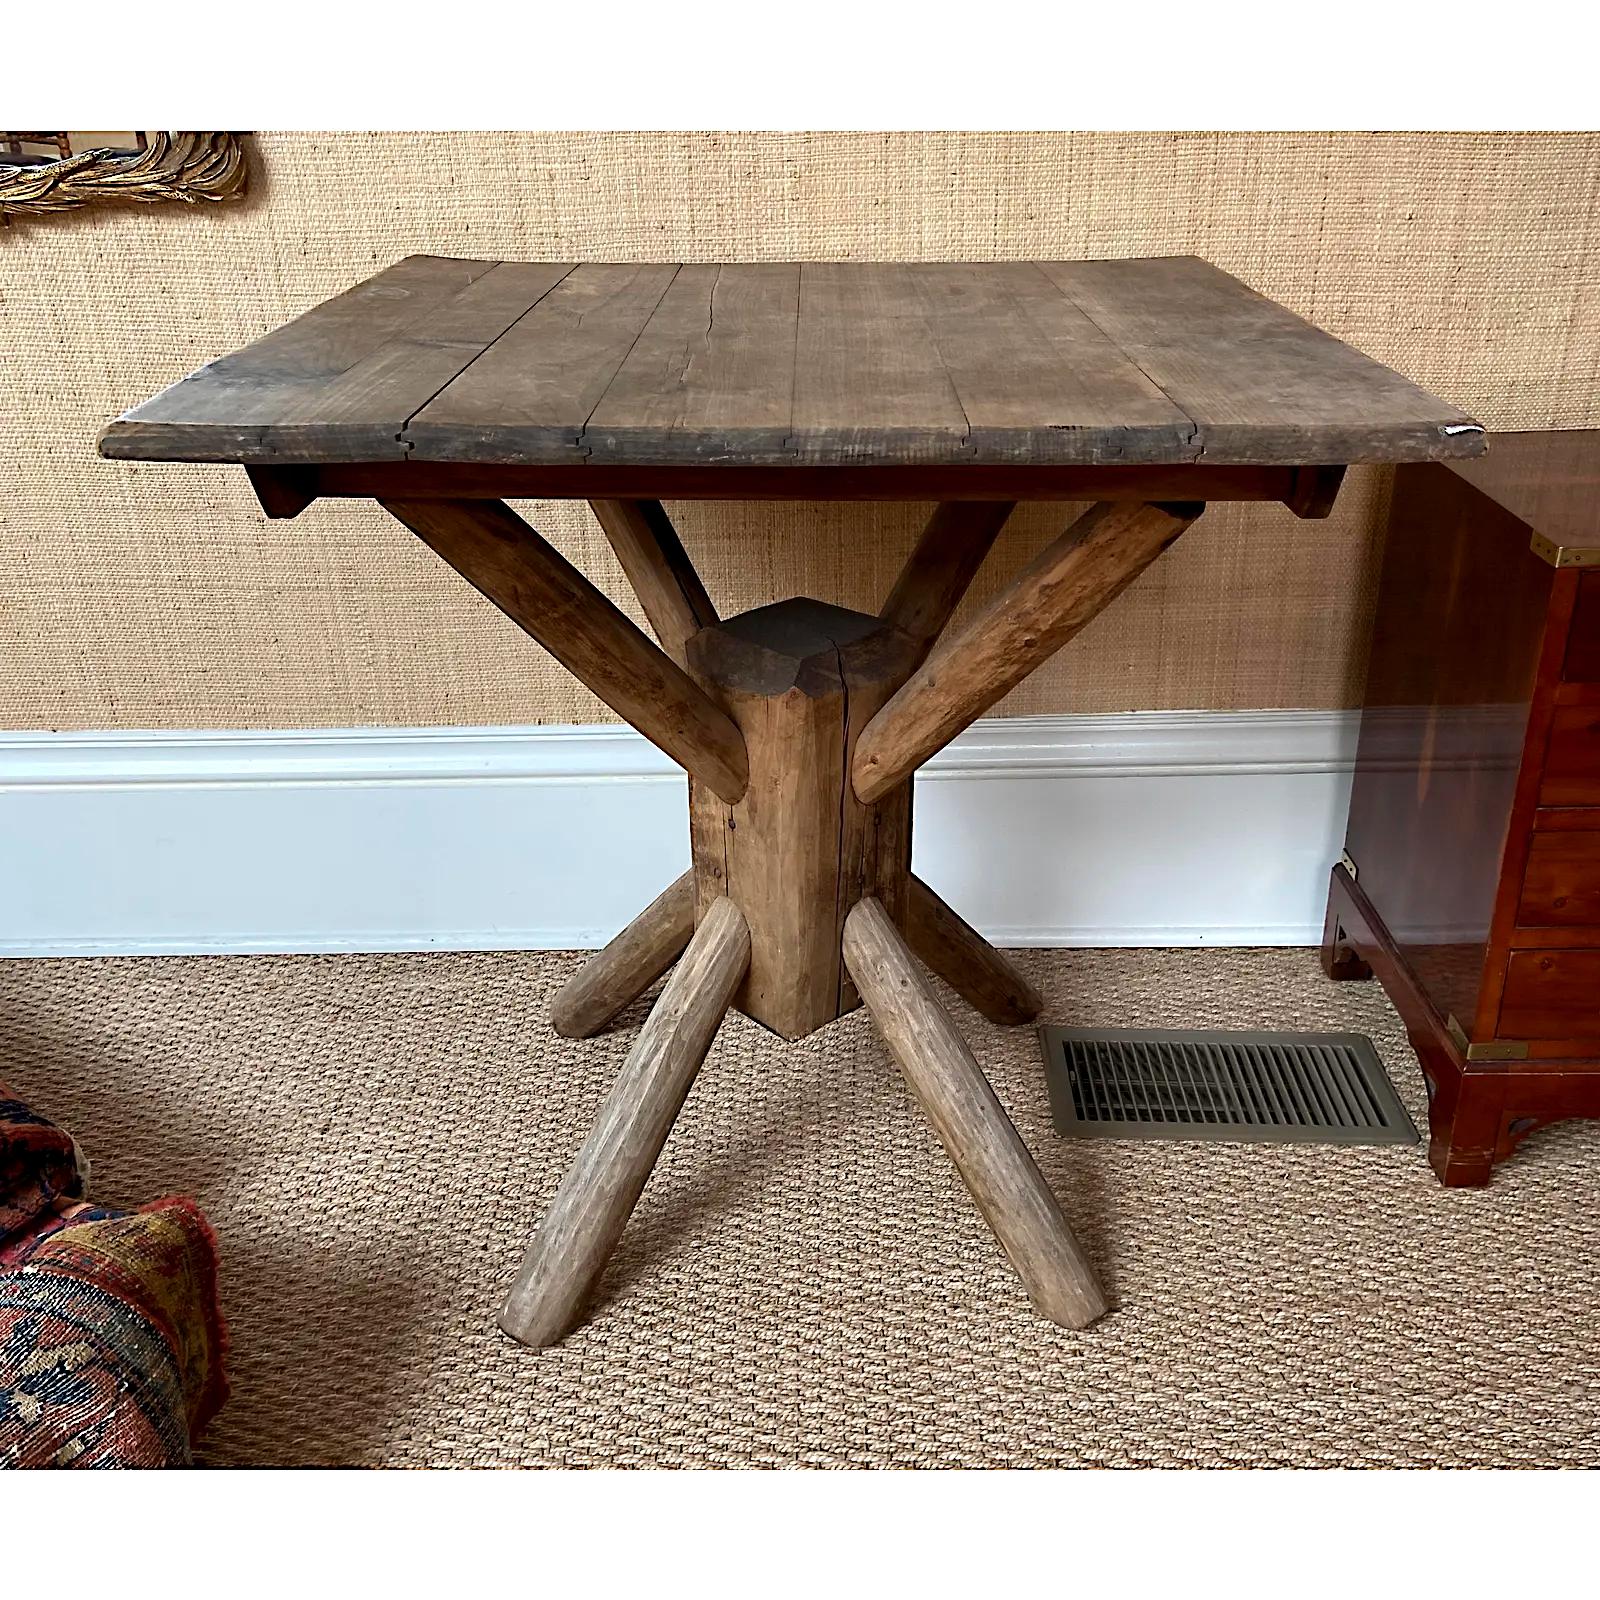 Very clean and sturdy Adirondack center or dining table,
circa 1940s and read for your home.